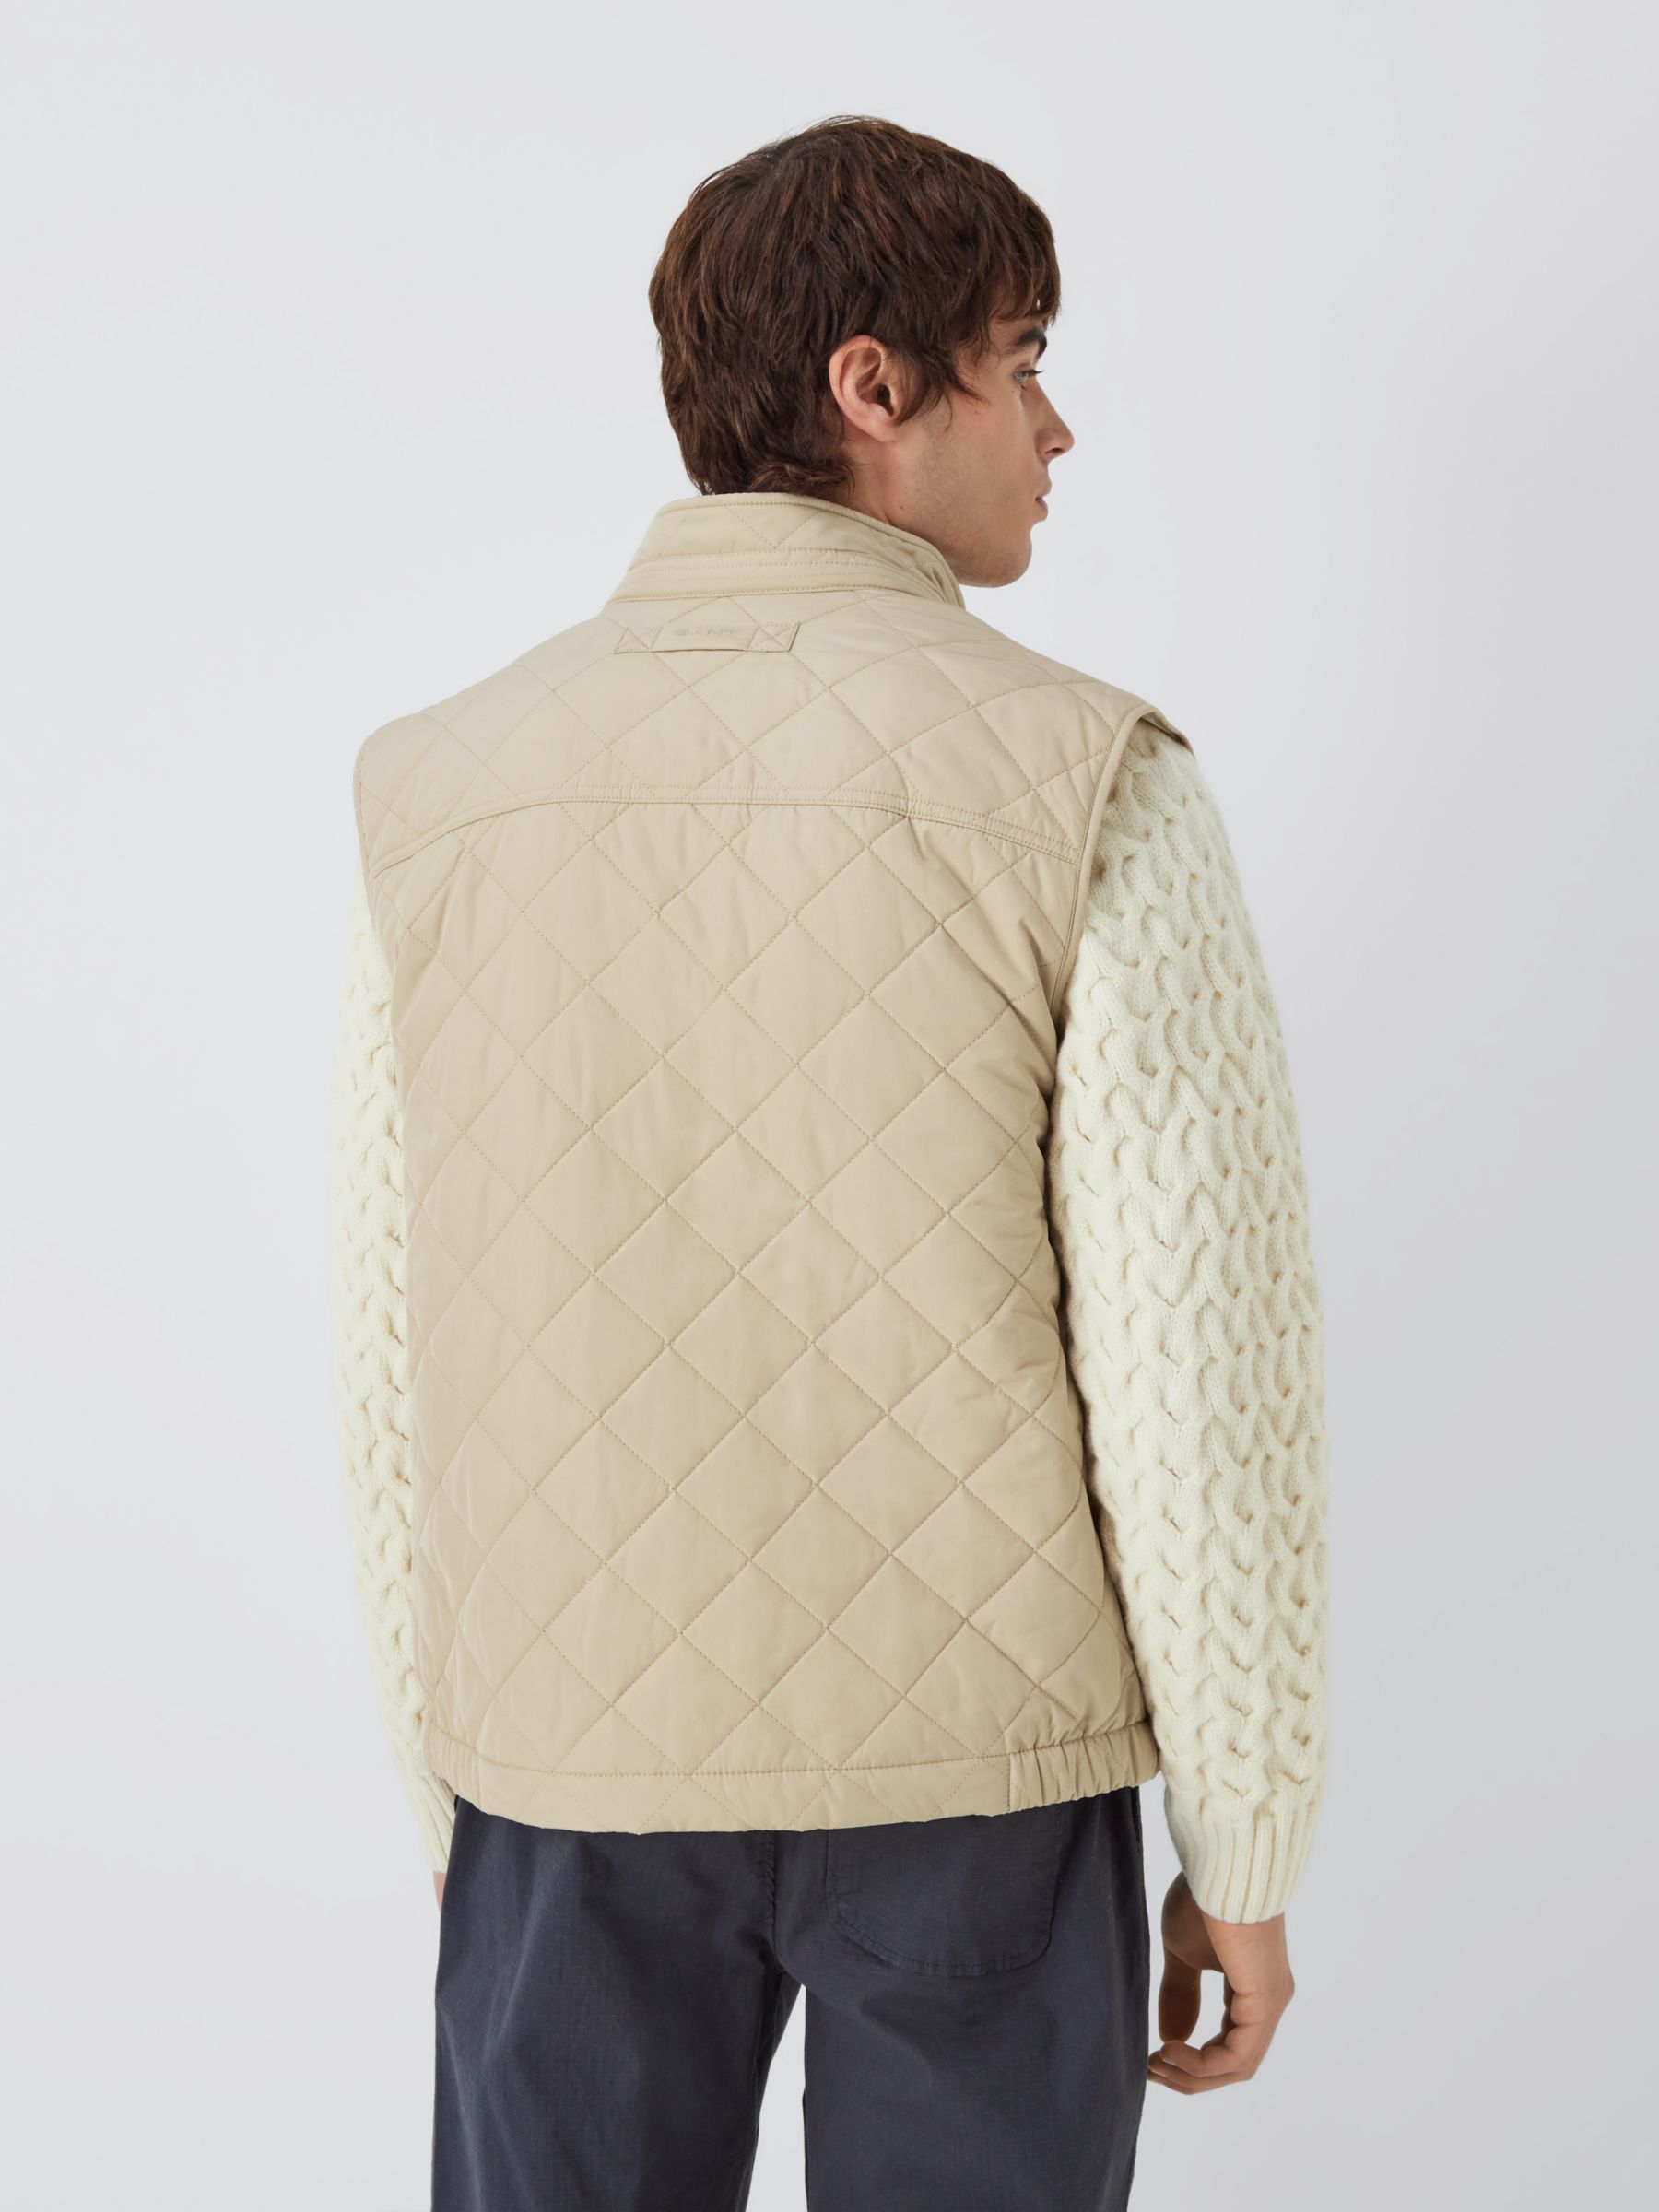 GANT Quilted Windcheater Gilet, Dry Sand, S